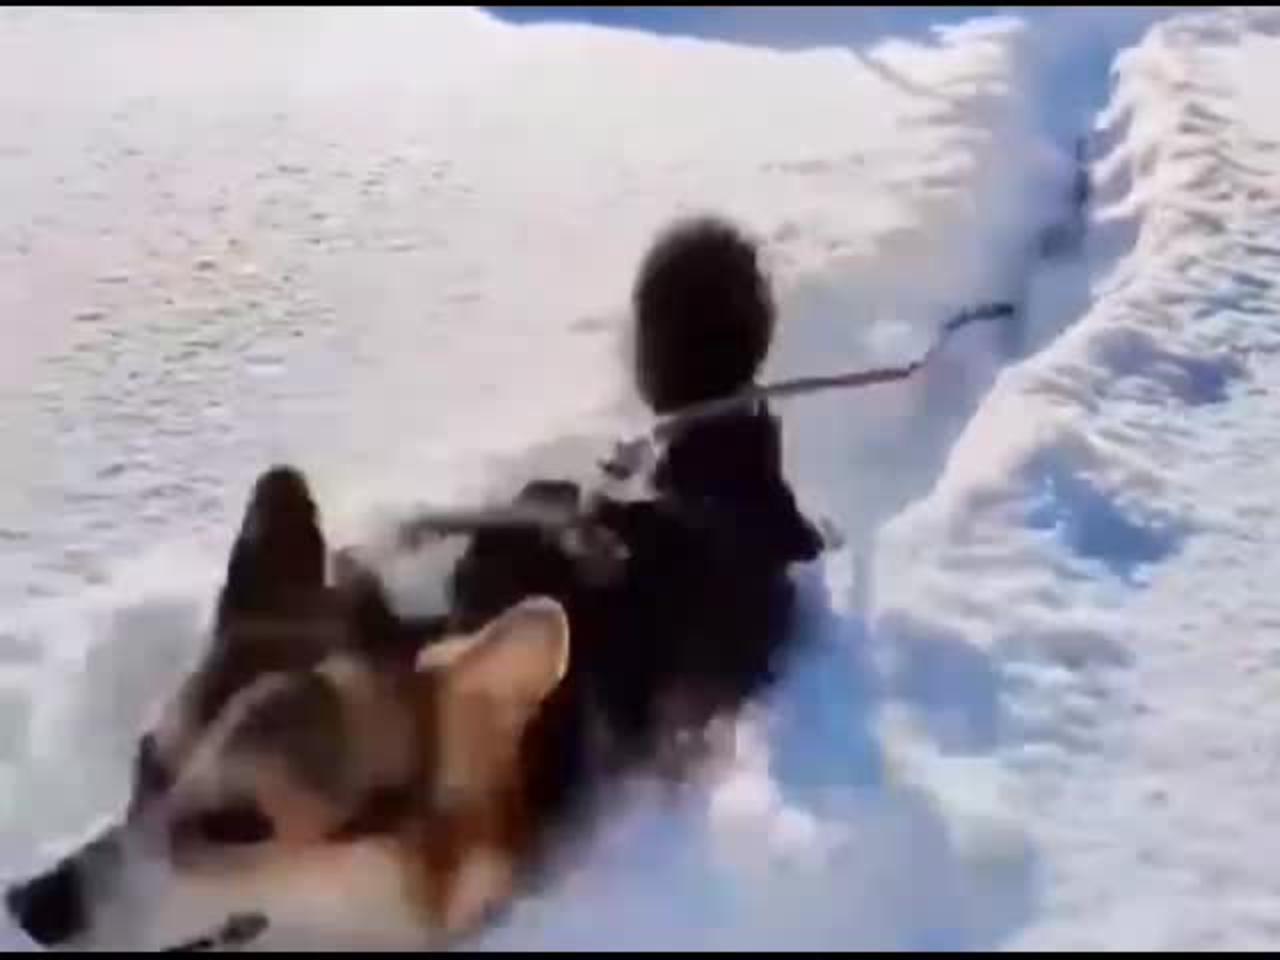 Flying my dog in the snow